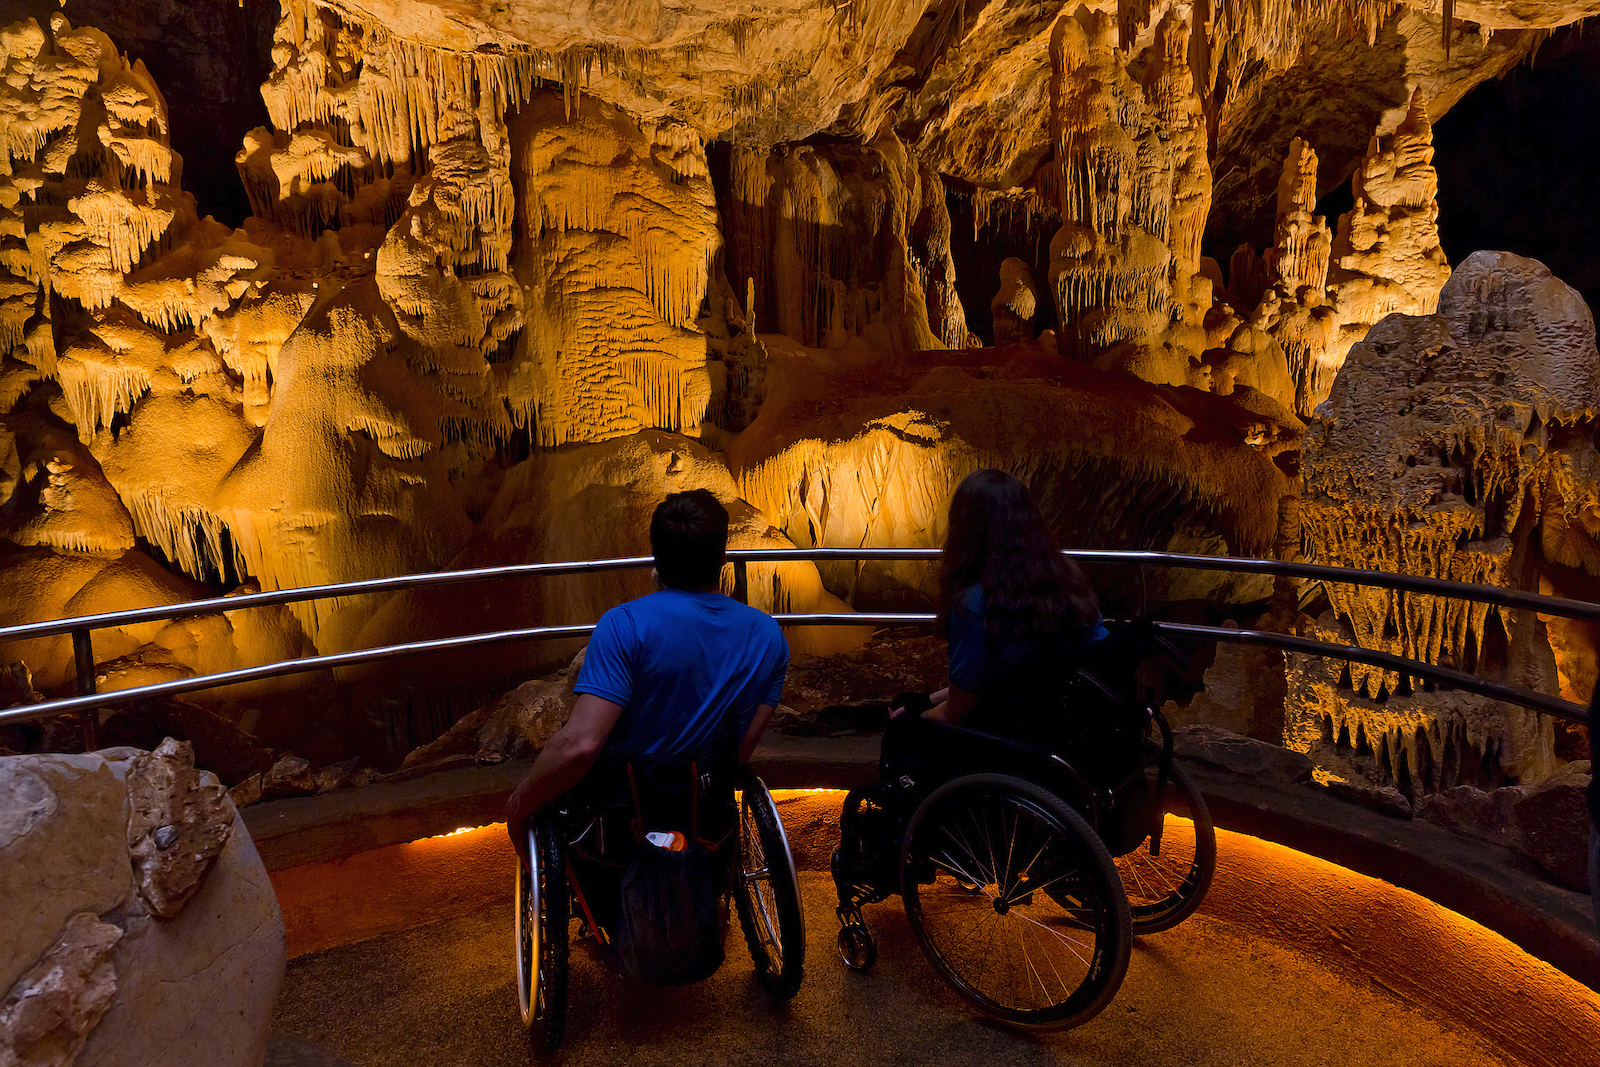 Two people in wheelchairs in the caves of Kartchner Caverns in southern Arizona